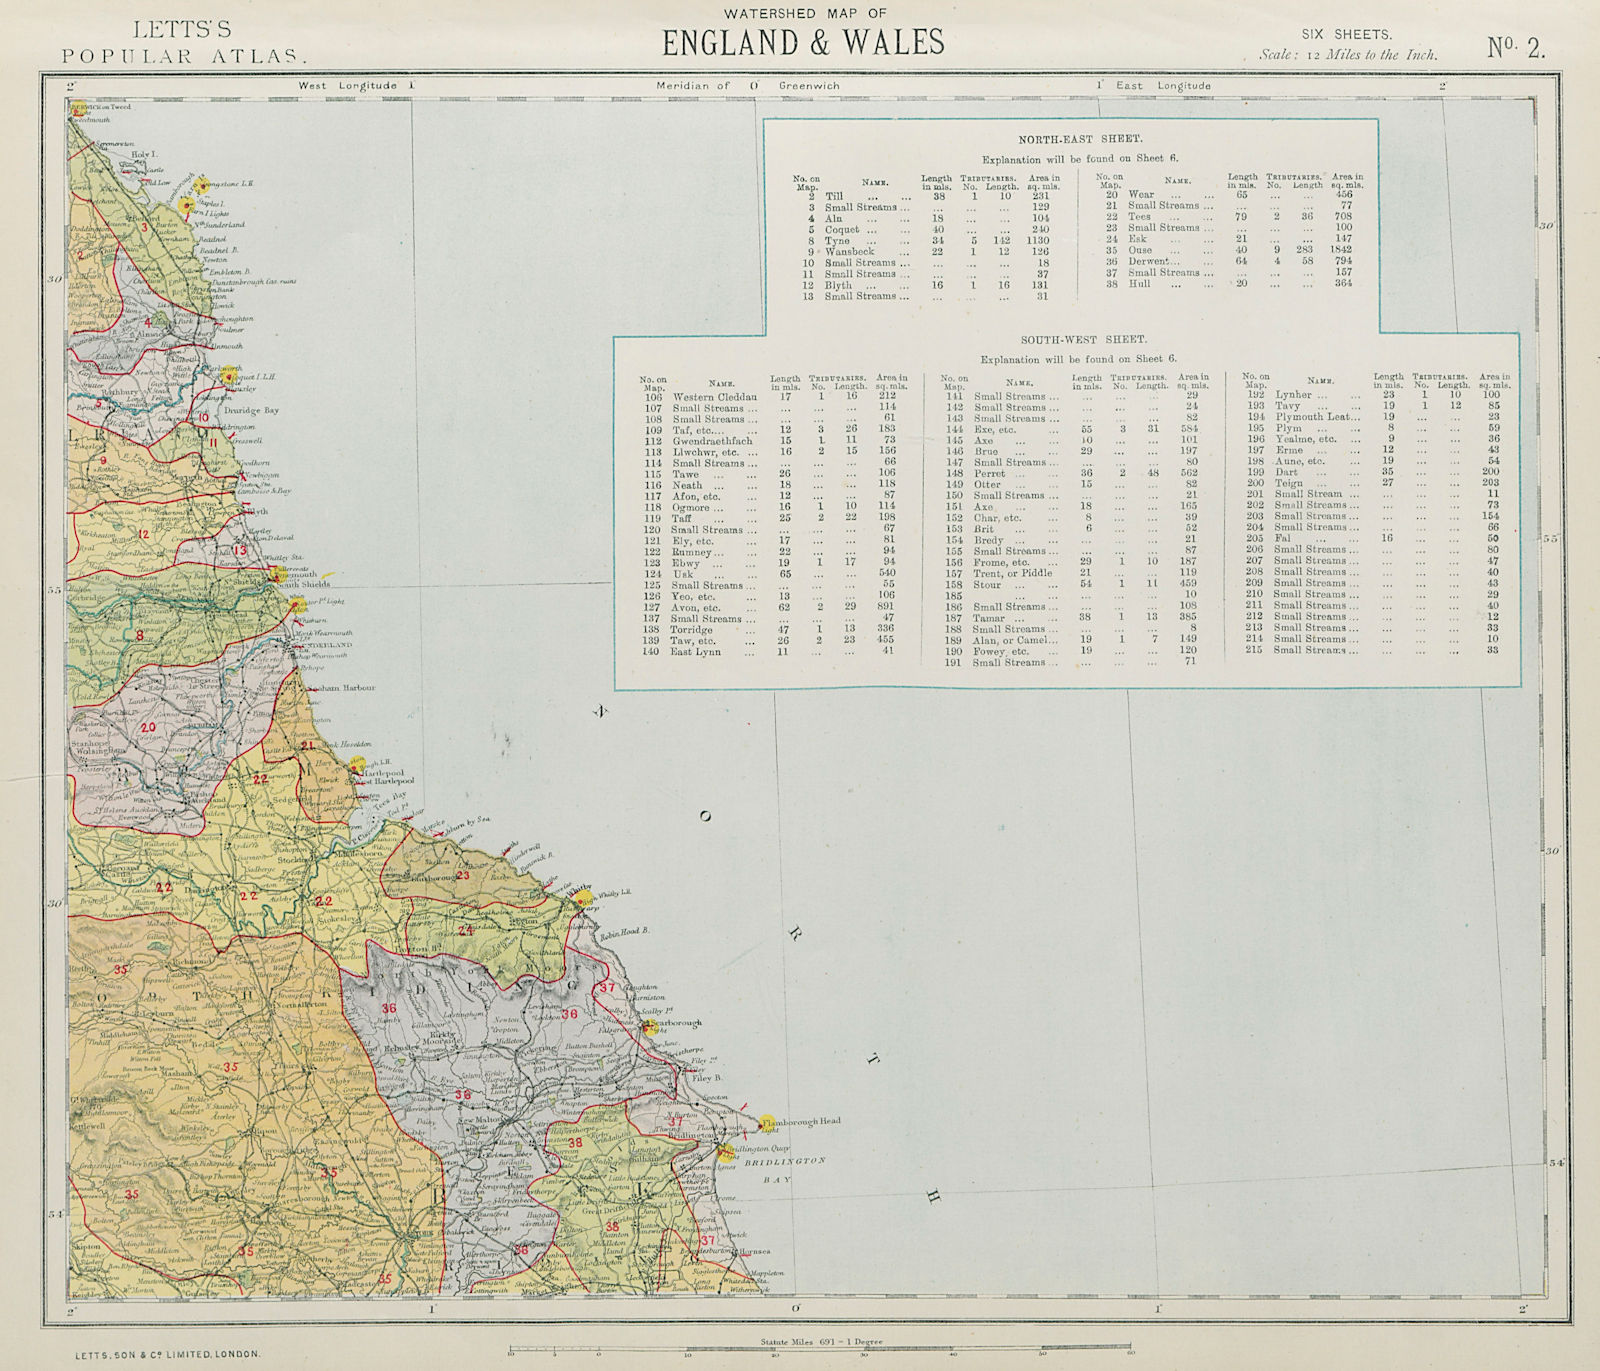 Associate Product NORTH YORKSHIRE, DURHAM & NORTHUMBERLAND COAST WATERSHEDS. LETTS 1884 old map